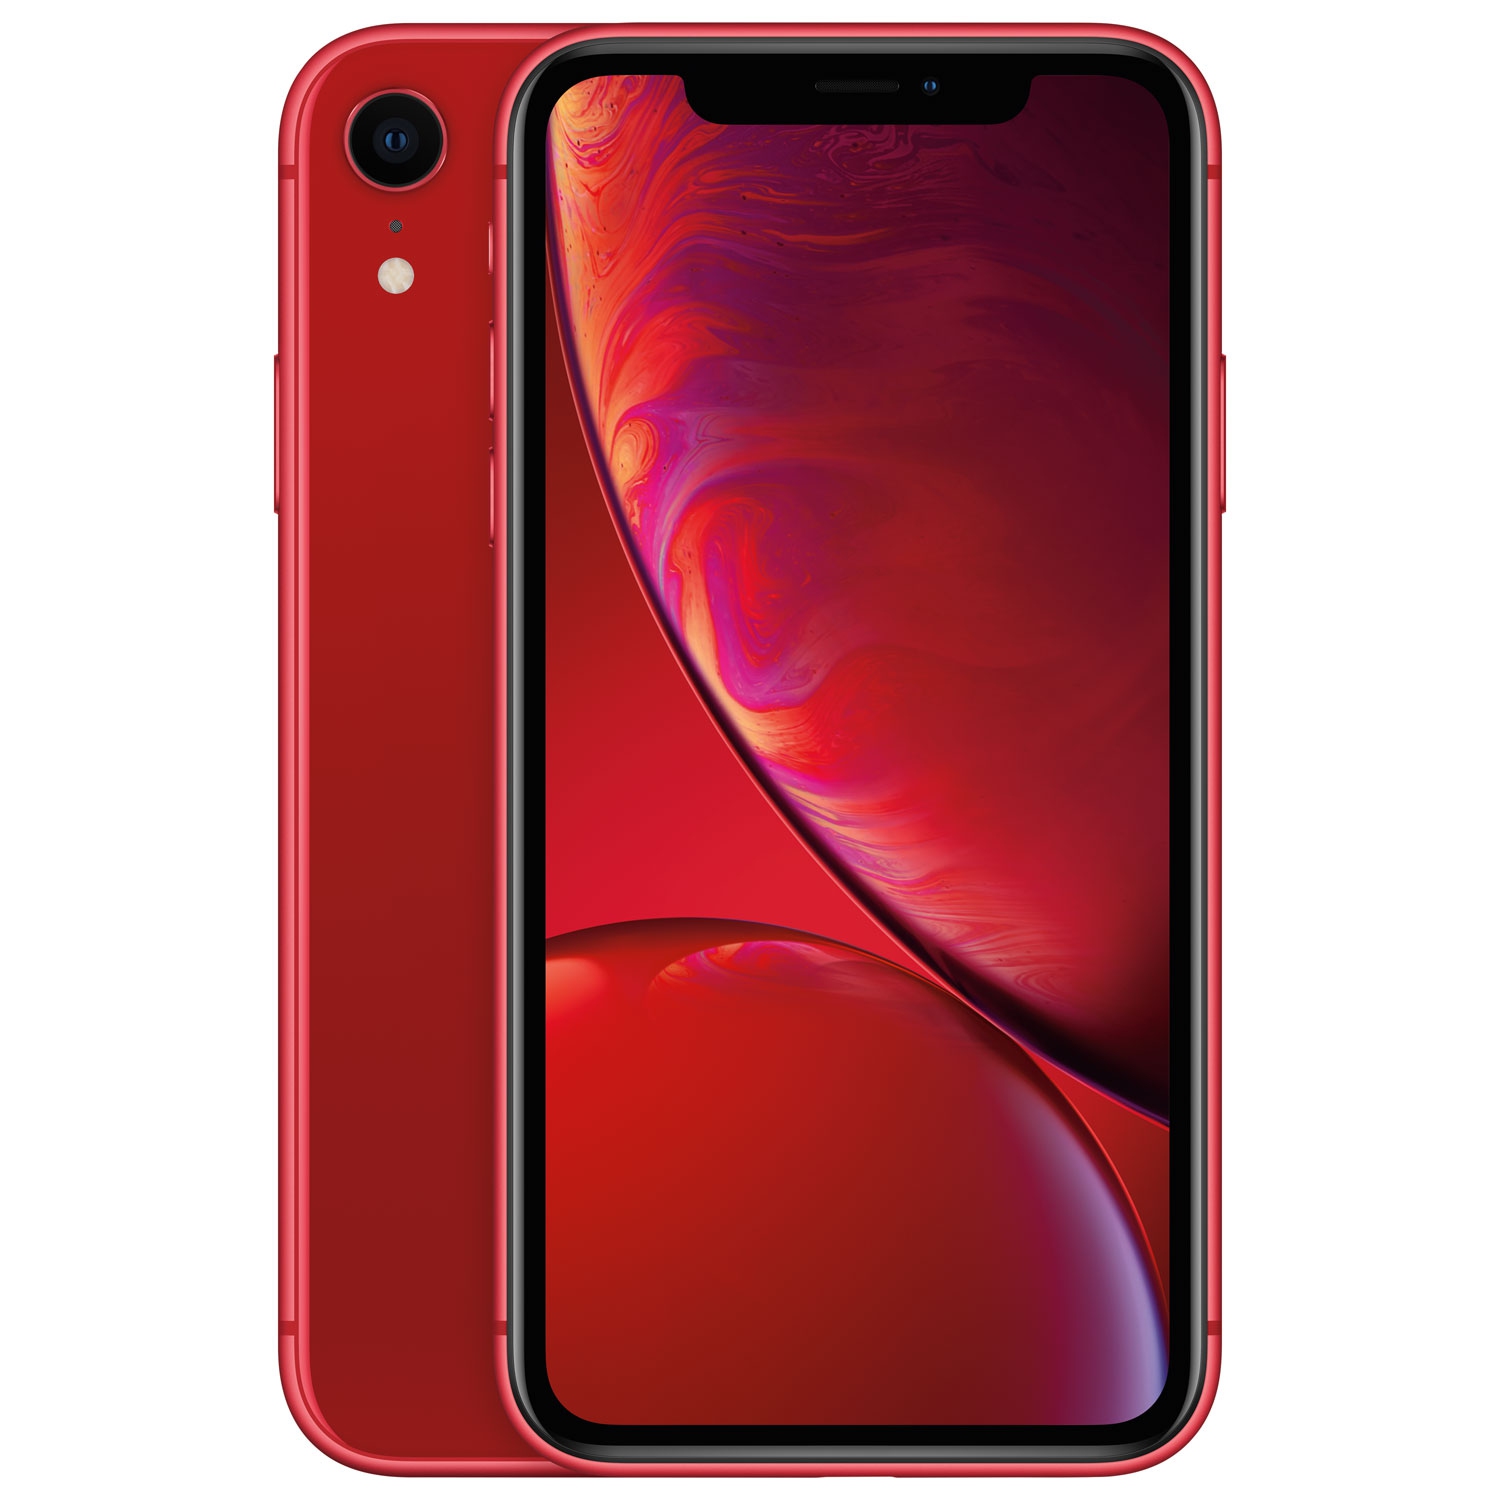 Apple iPhone XR 256GB Smartphone - (Product)RED - Unlocked - Open Box